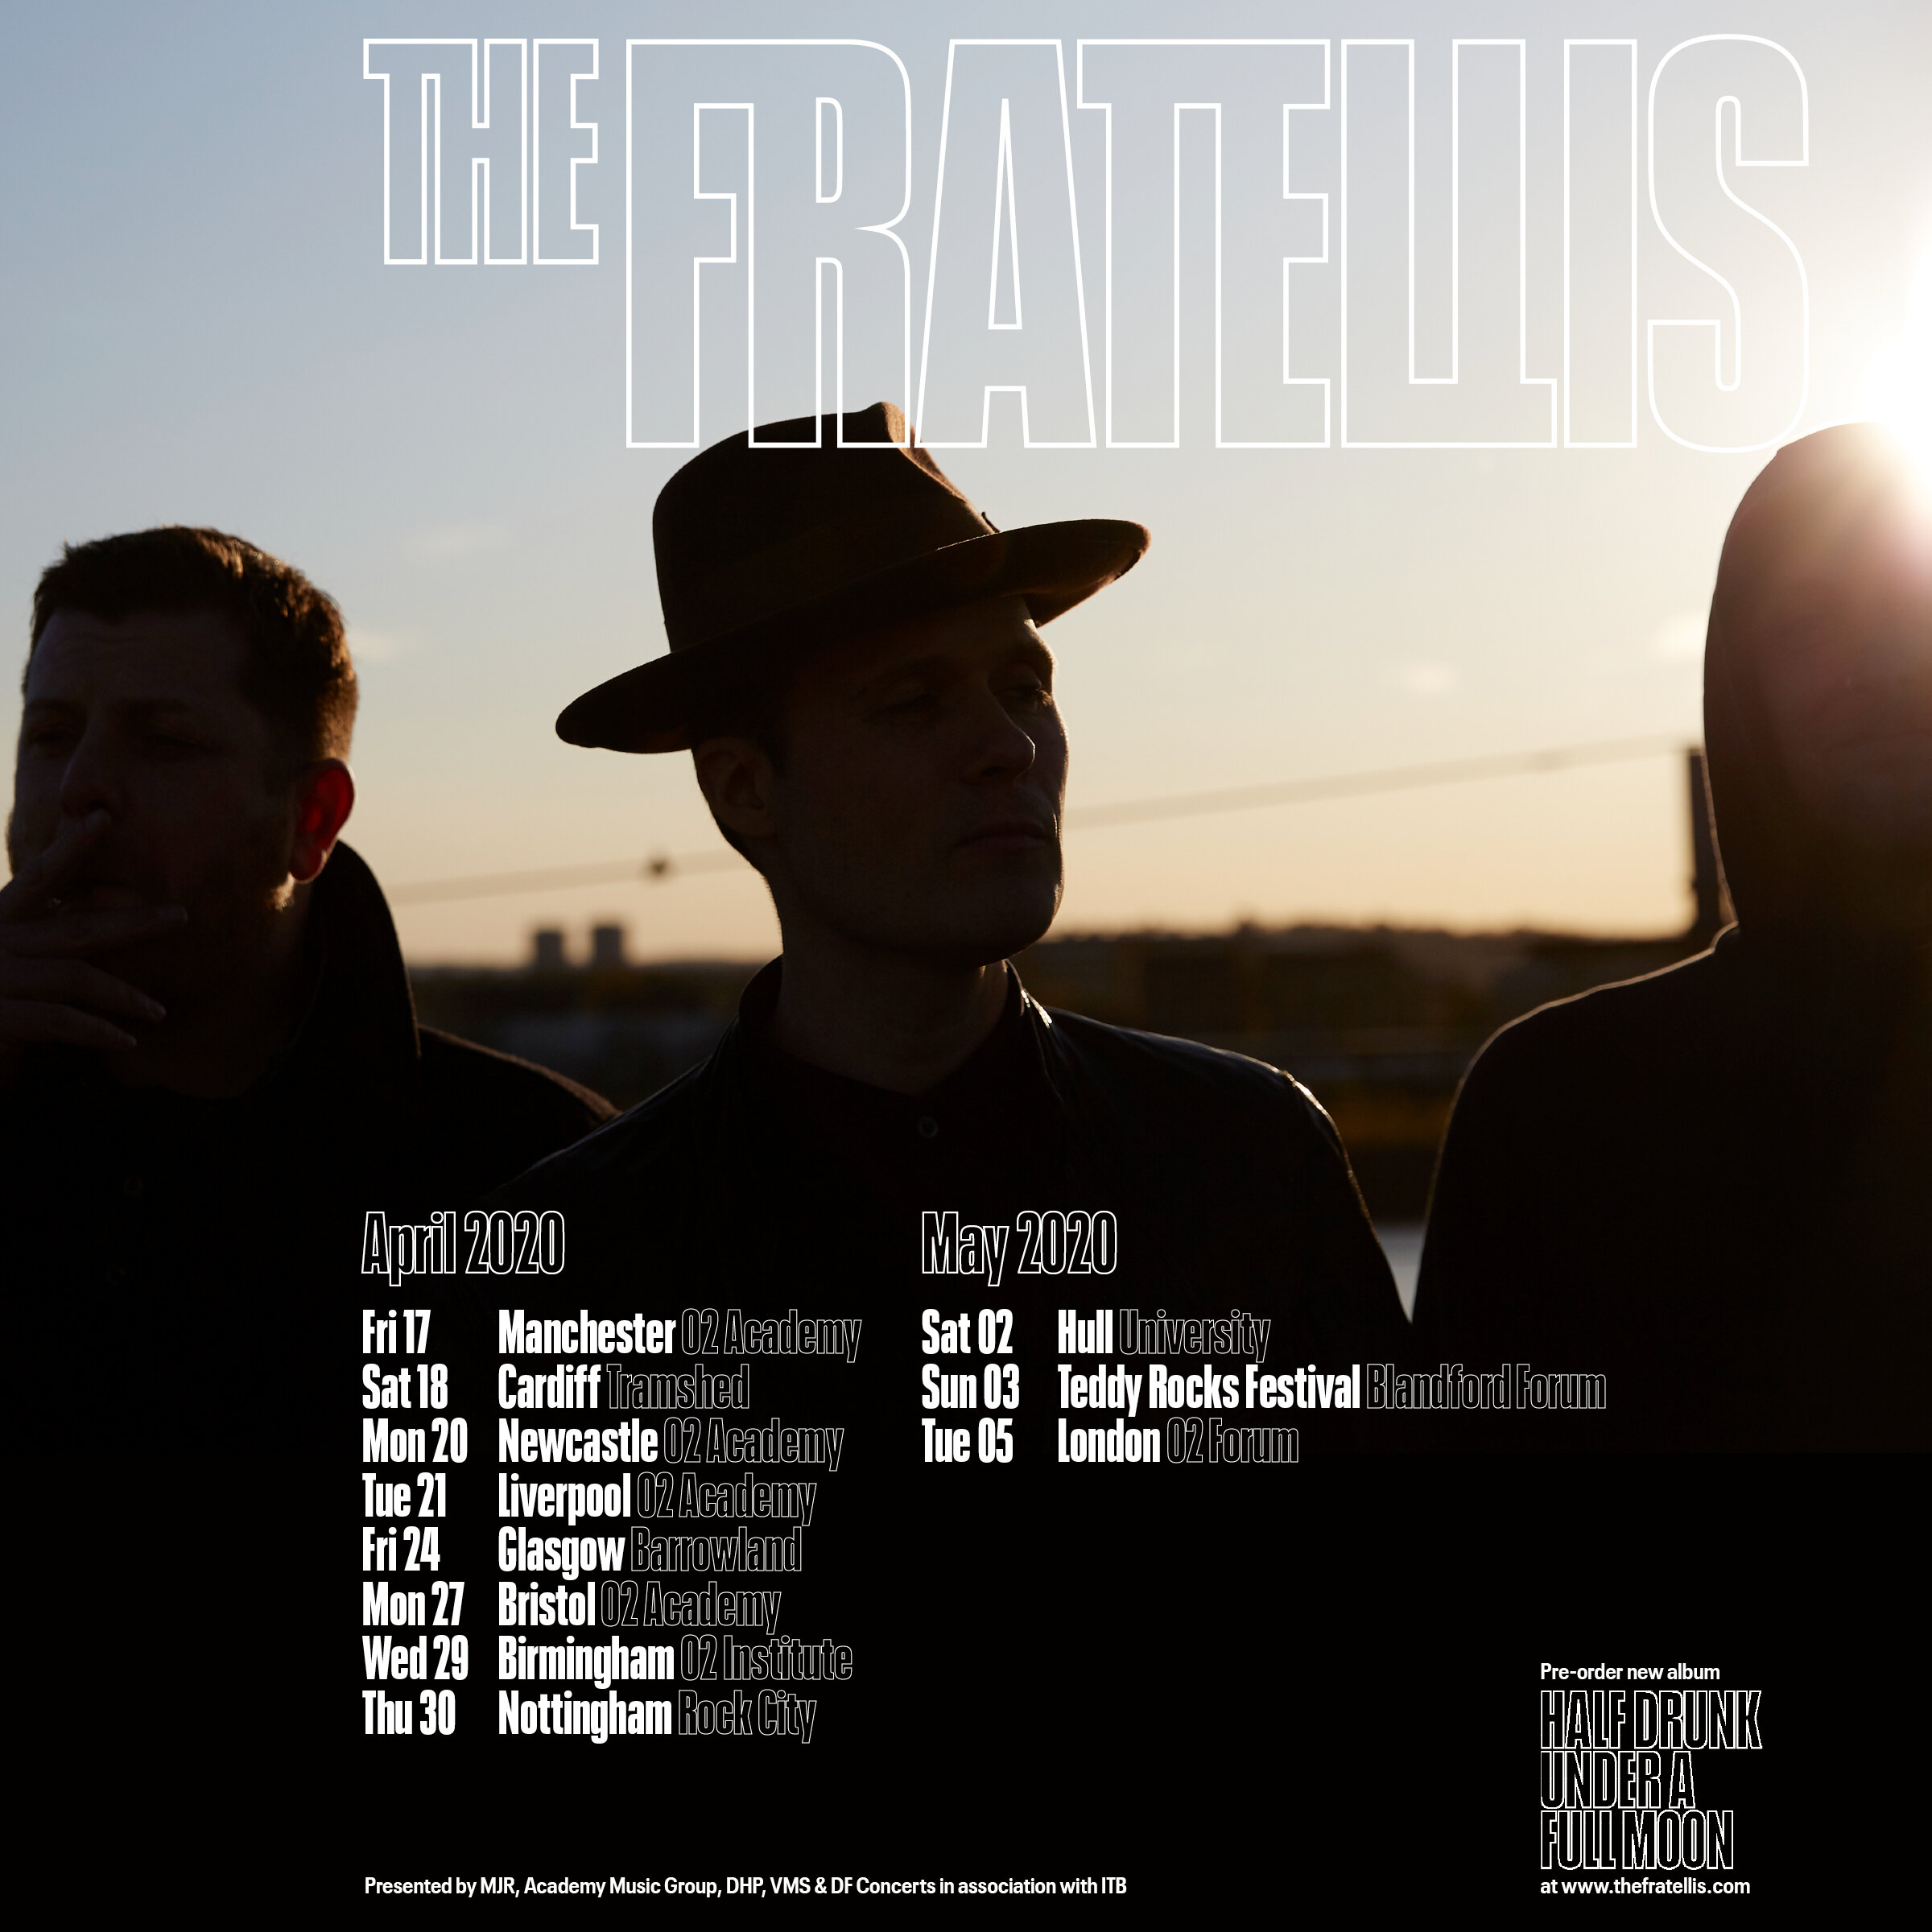 will the fratellis tour again